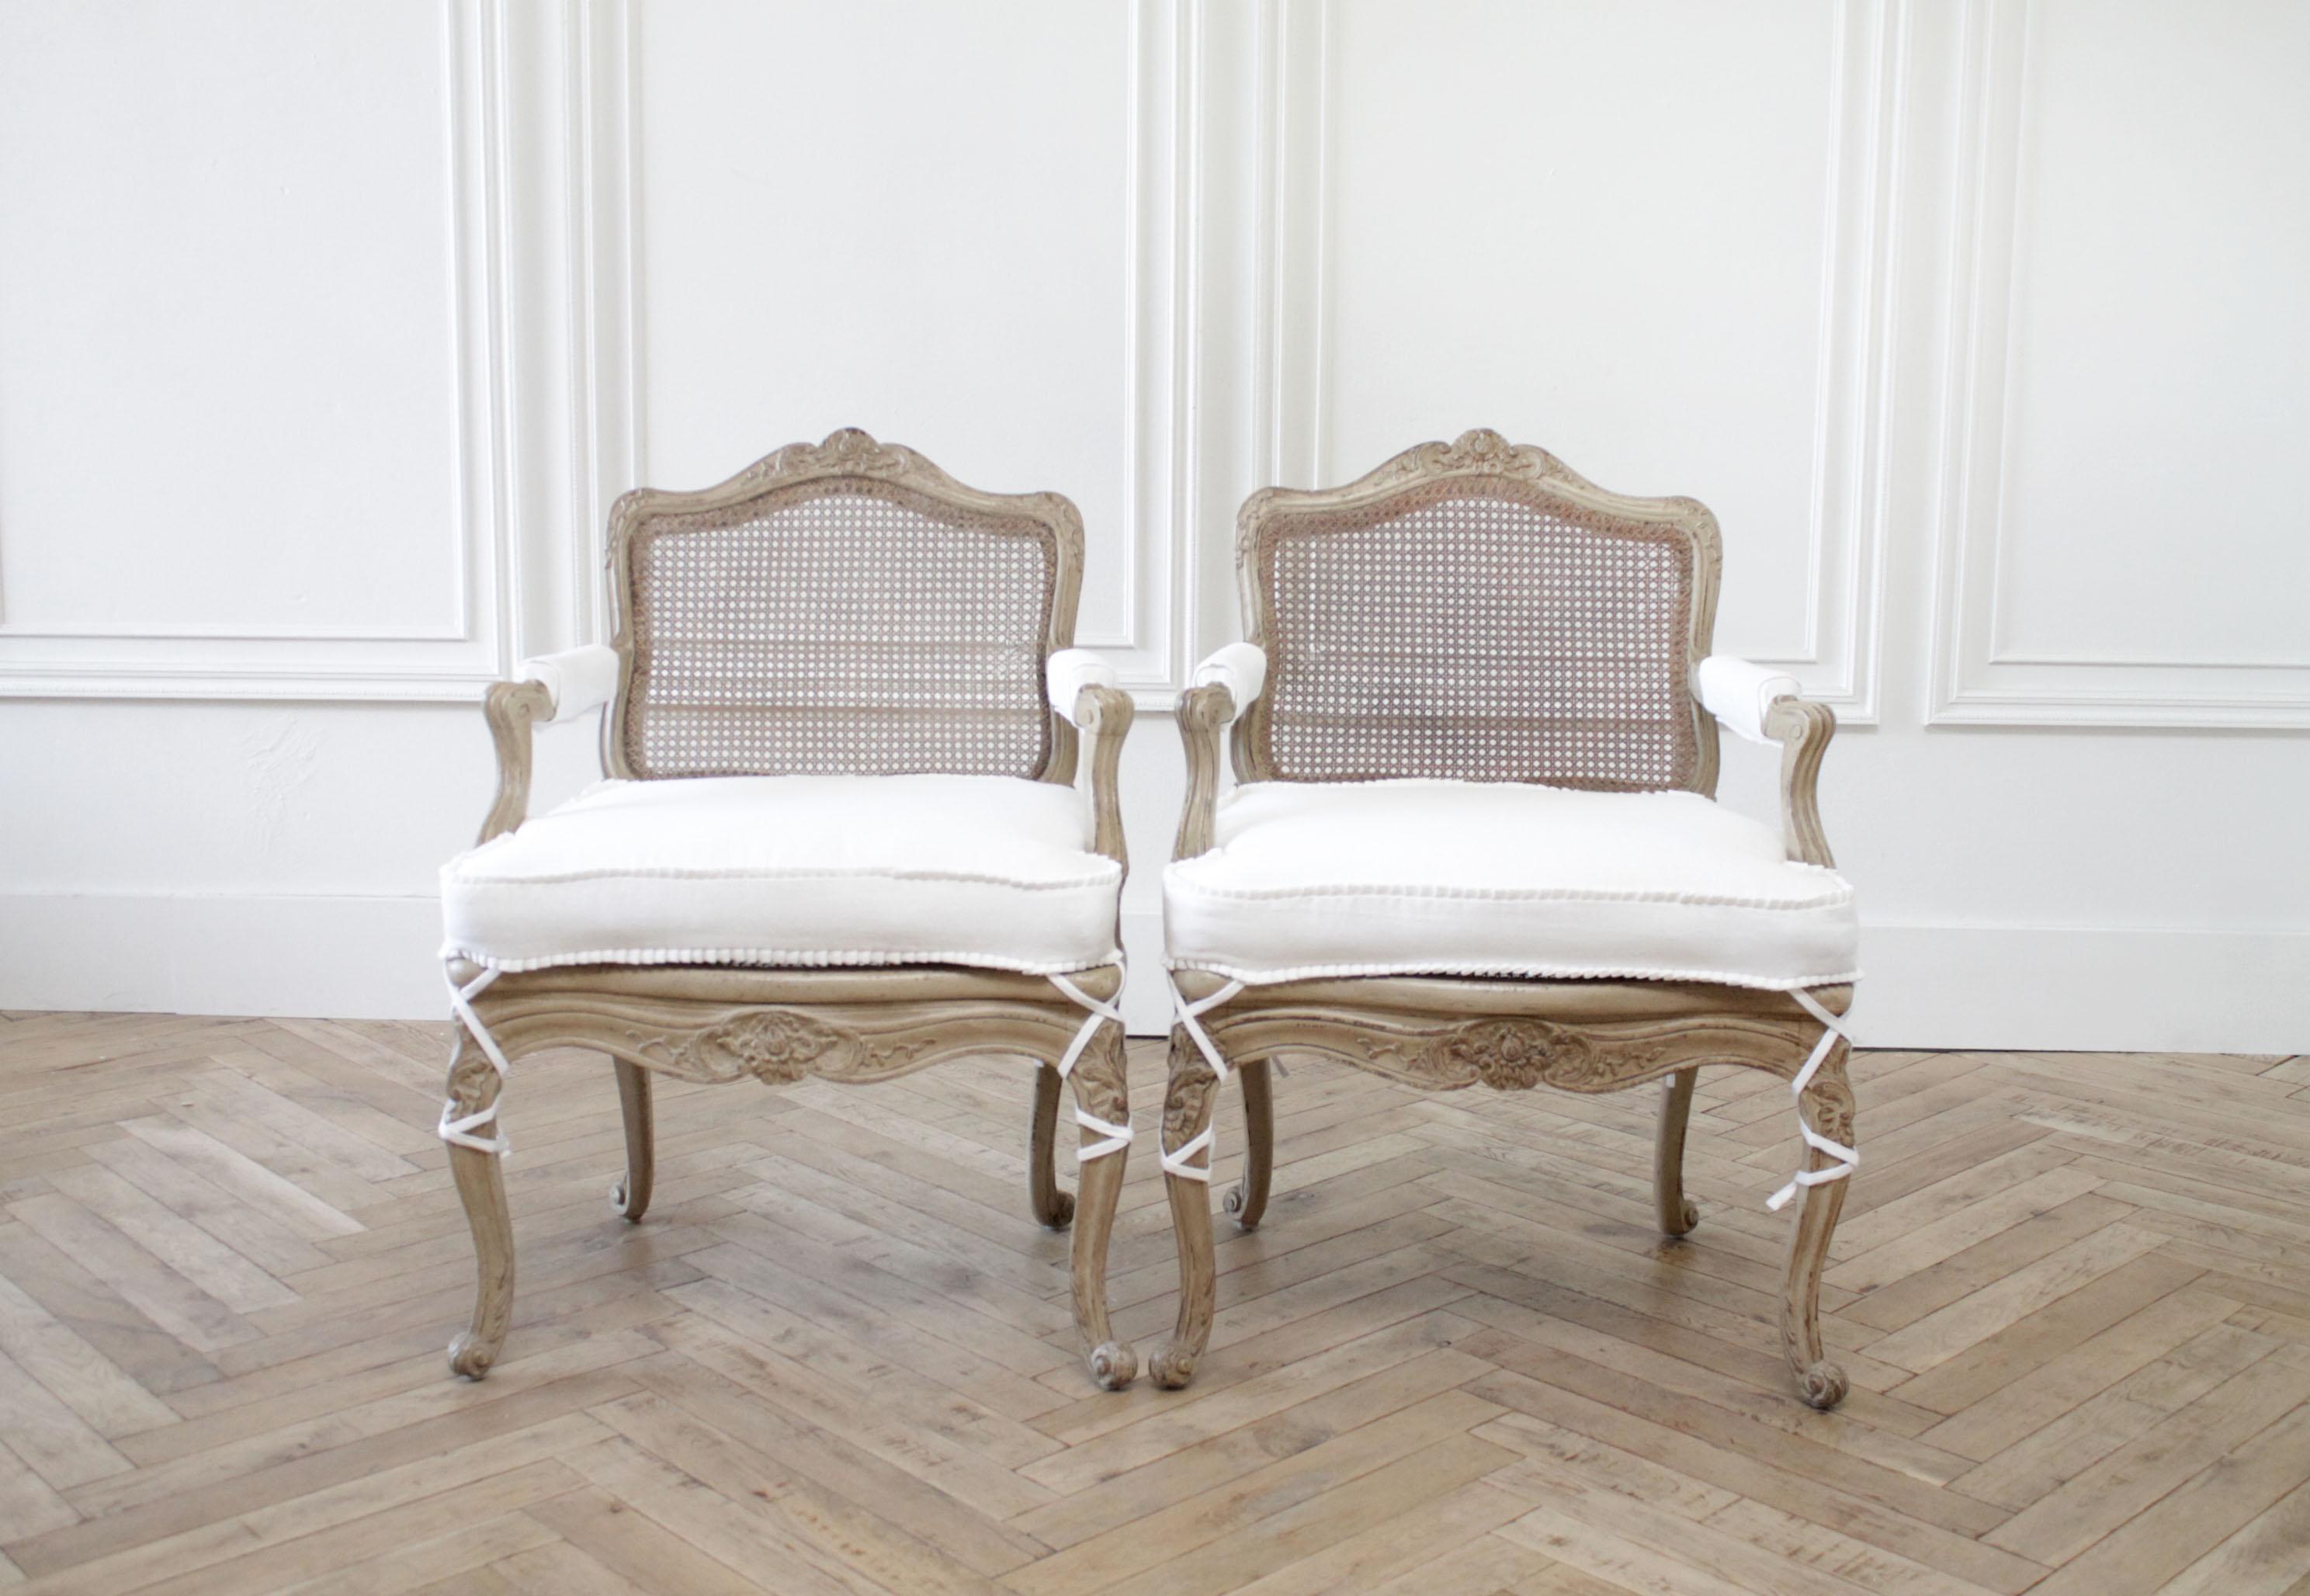 Pair of antique French armchairs in original painted finish and white linen
these chairs are painted in a putty grey tone, it is the perfect natural linen taupe color, with subtle distressing that is natural from original wear. The cane is